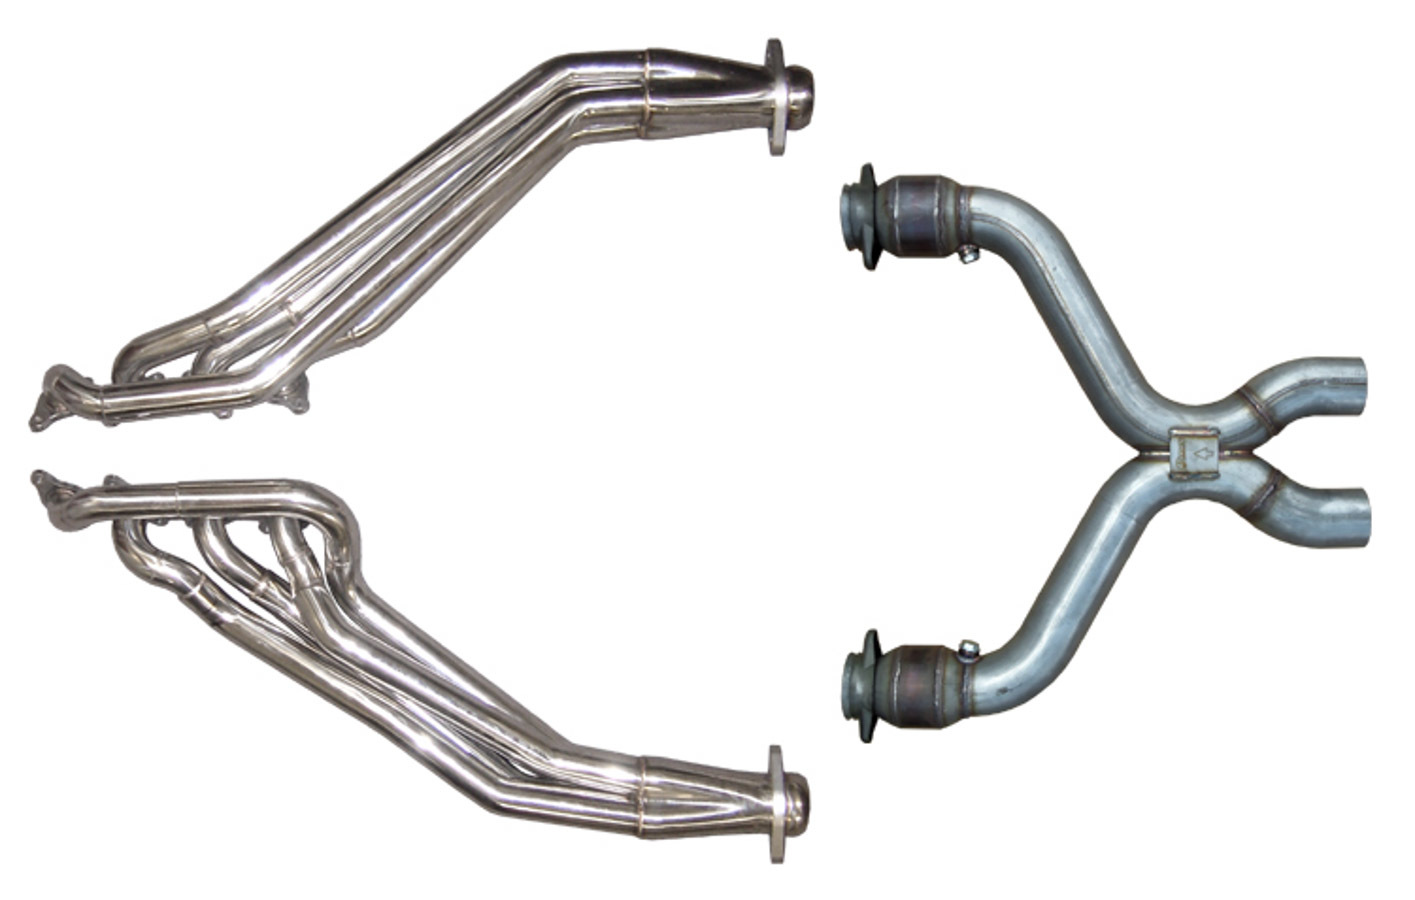 Pypes Headers and Catted X-Pipe, Long Tube, 1-3/4 to 1-7/8" Primary, 2-1/2" Collector, Stainless, Polished, Ford Coy